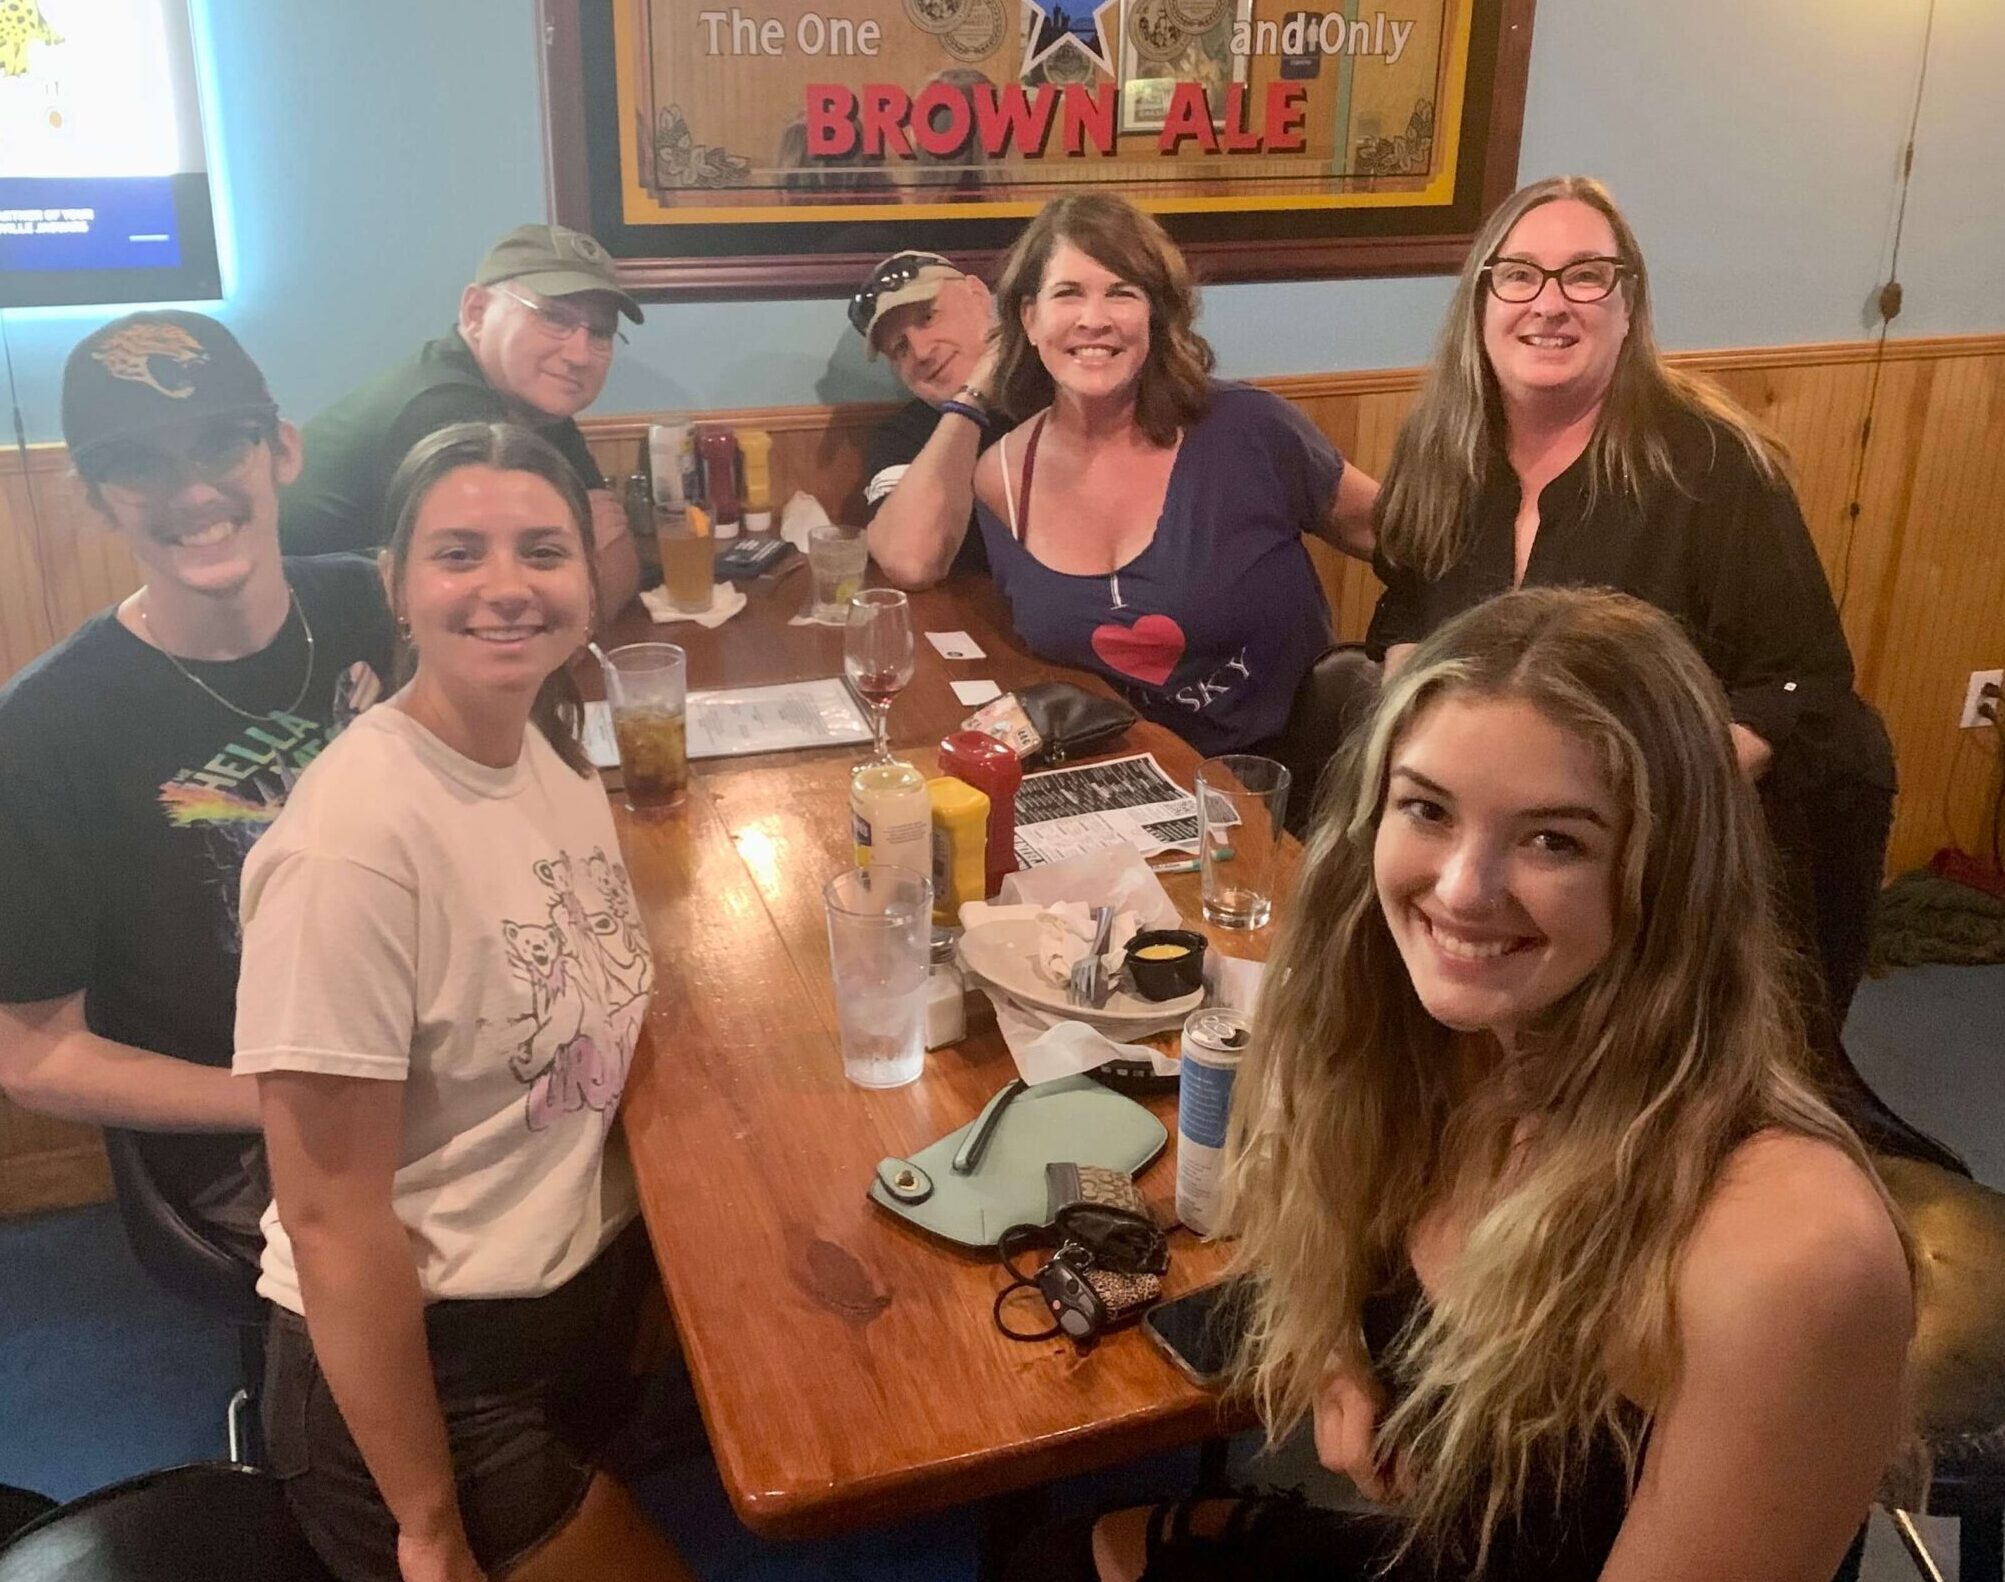 Monkey's Uncle Tavern Jacksonville Beach FL 32250 trivia night: group of young people and adults smiling with a Newcastle Brown Ale sign behind them